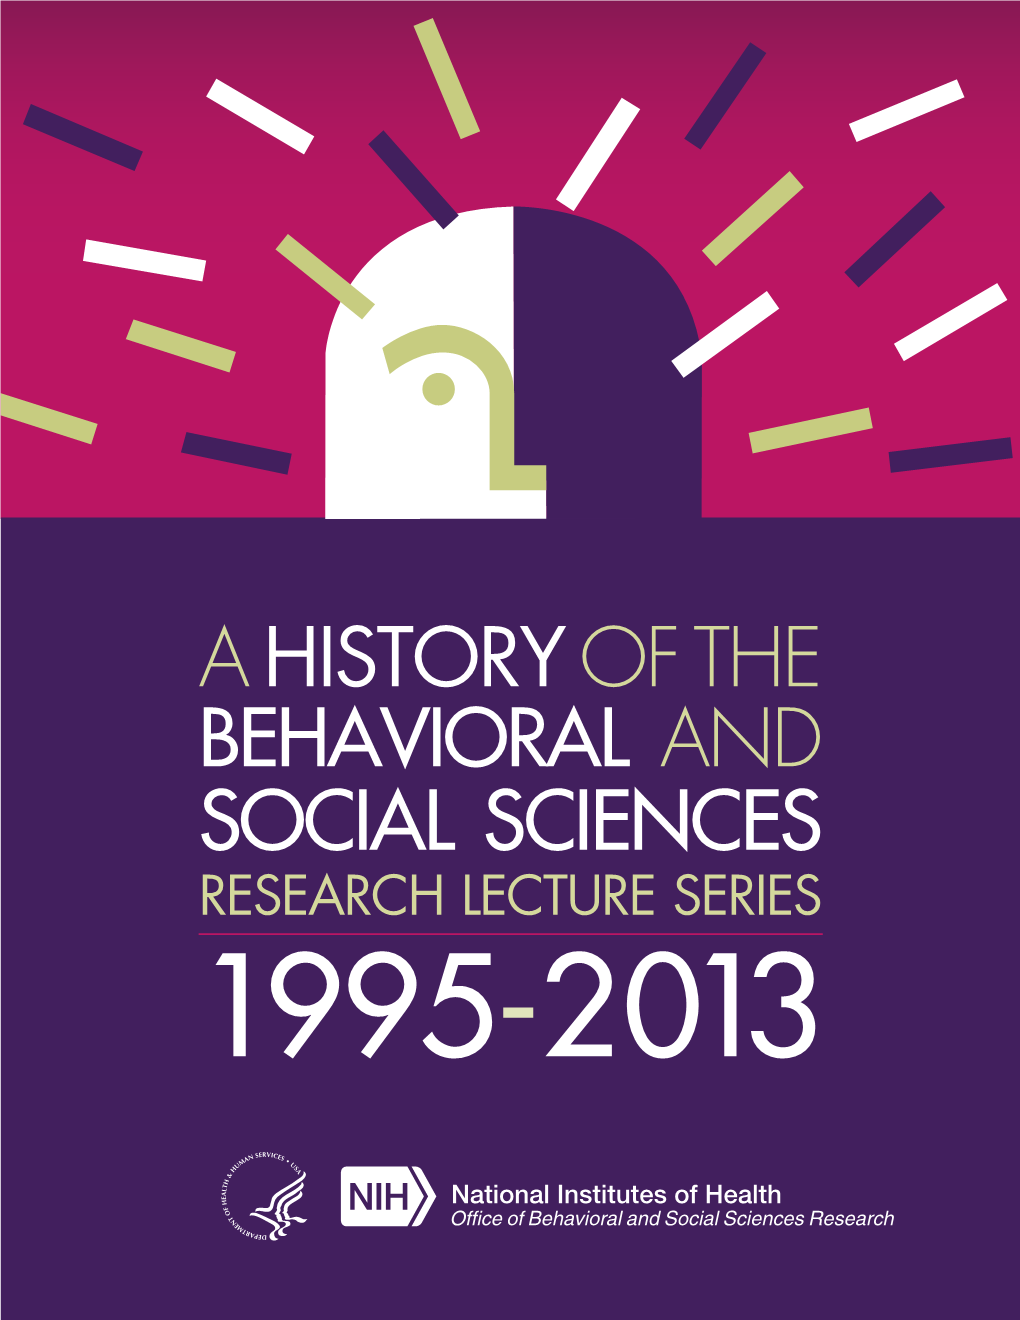 The History of the Behavioral and Social Sciences Research Lecture